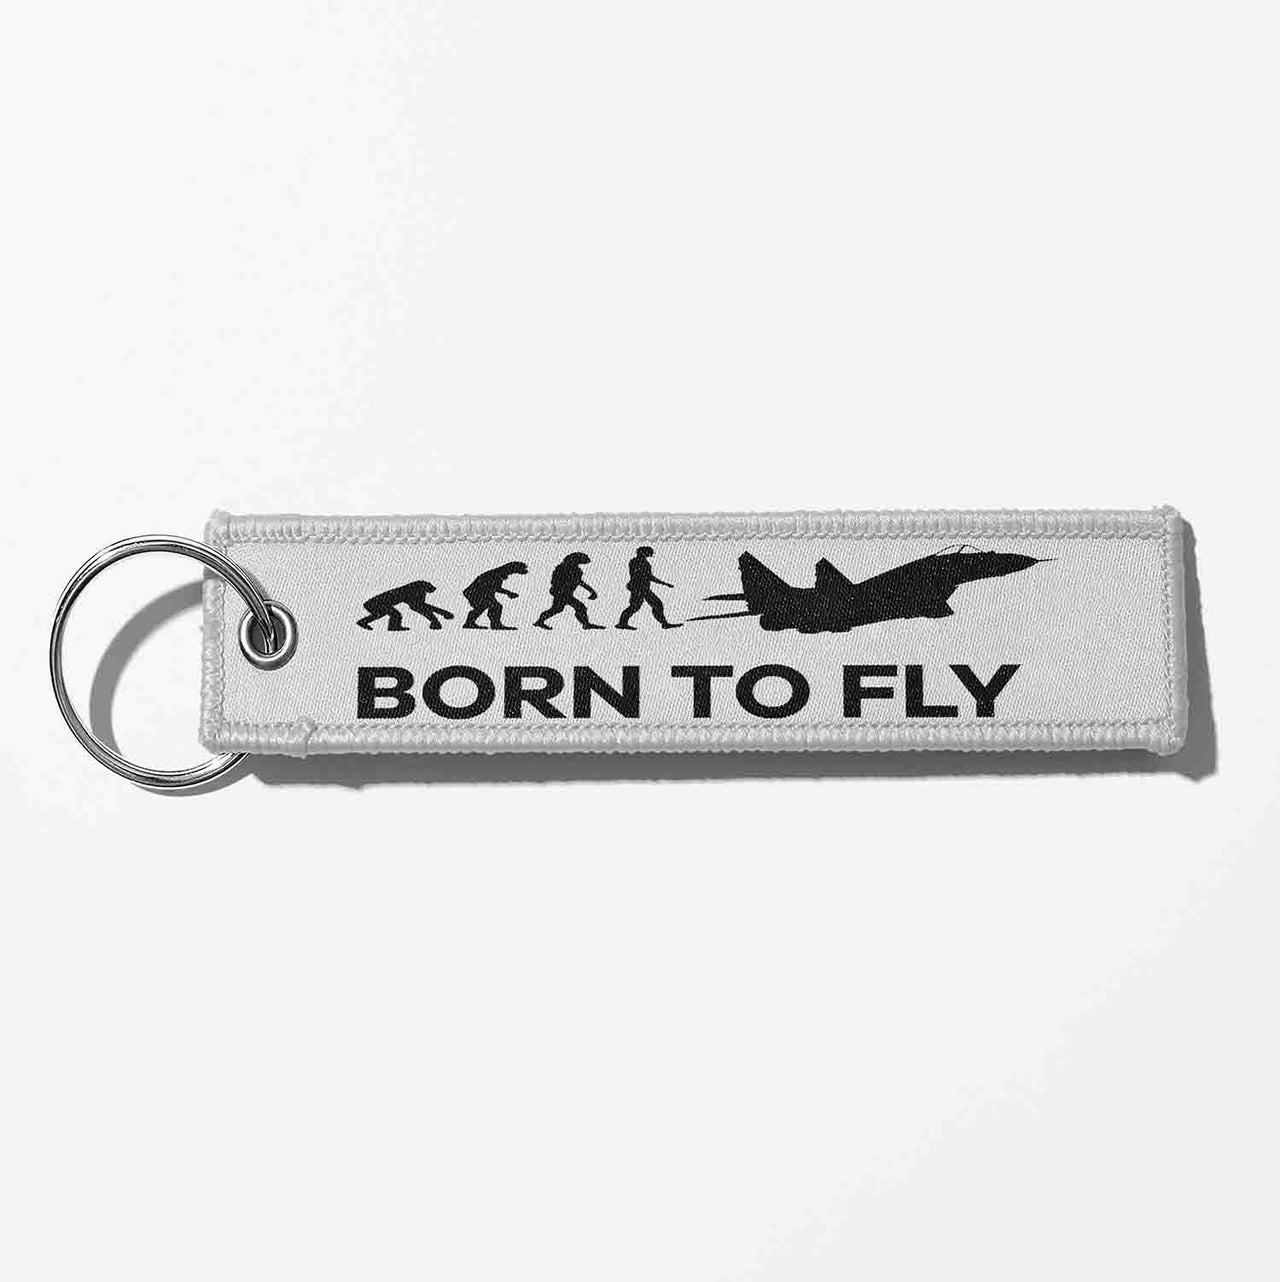 Born To Fly (Military) Designed Key Chains